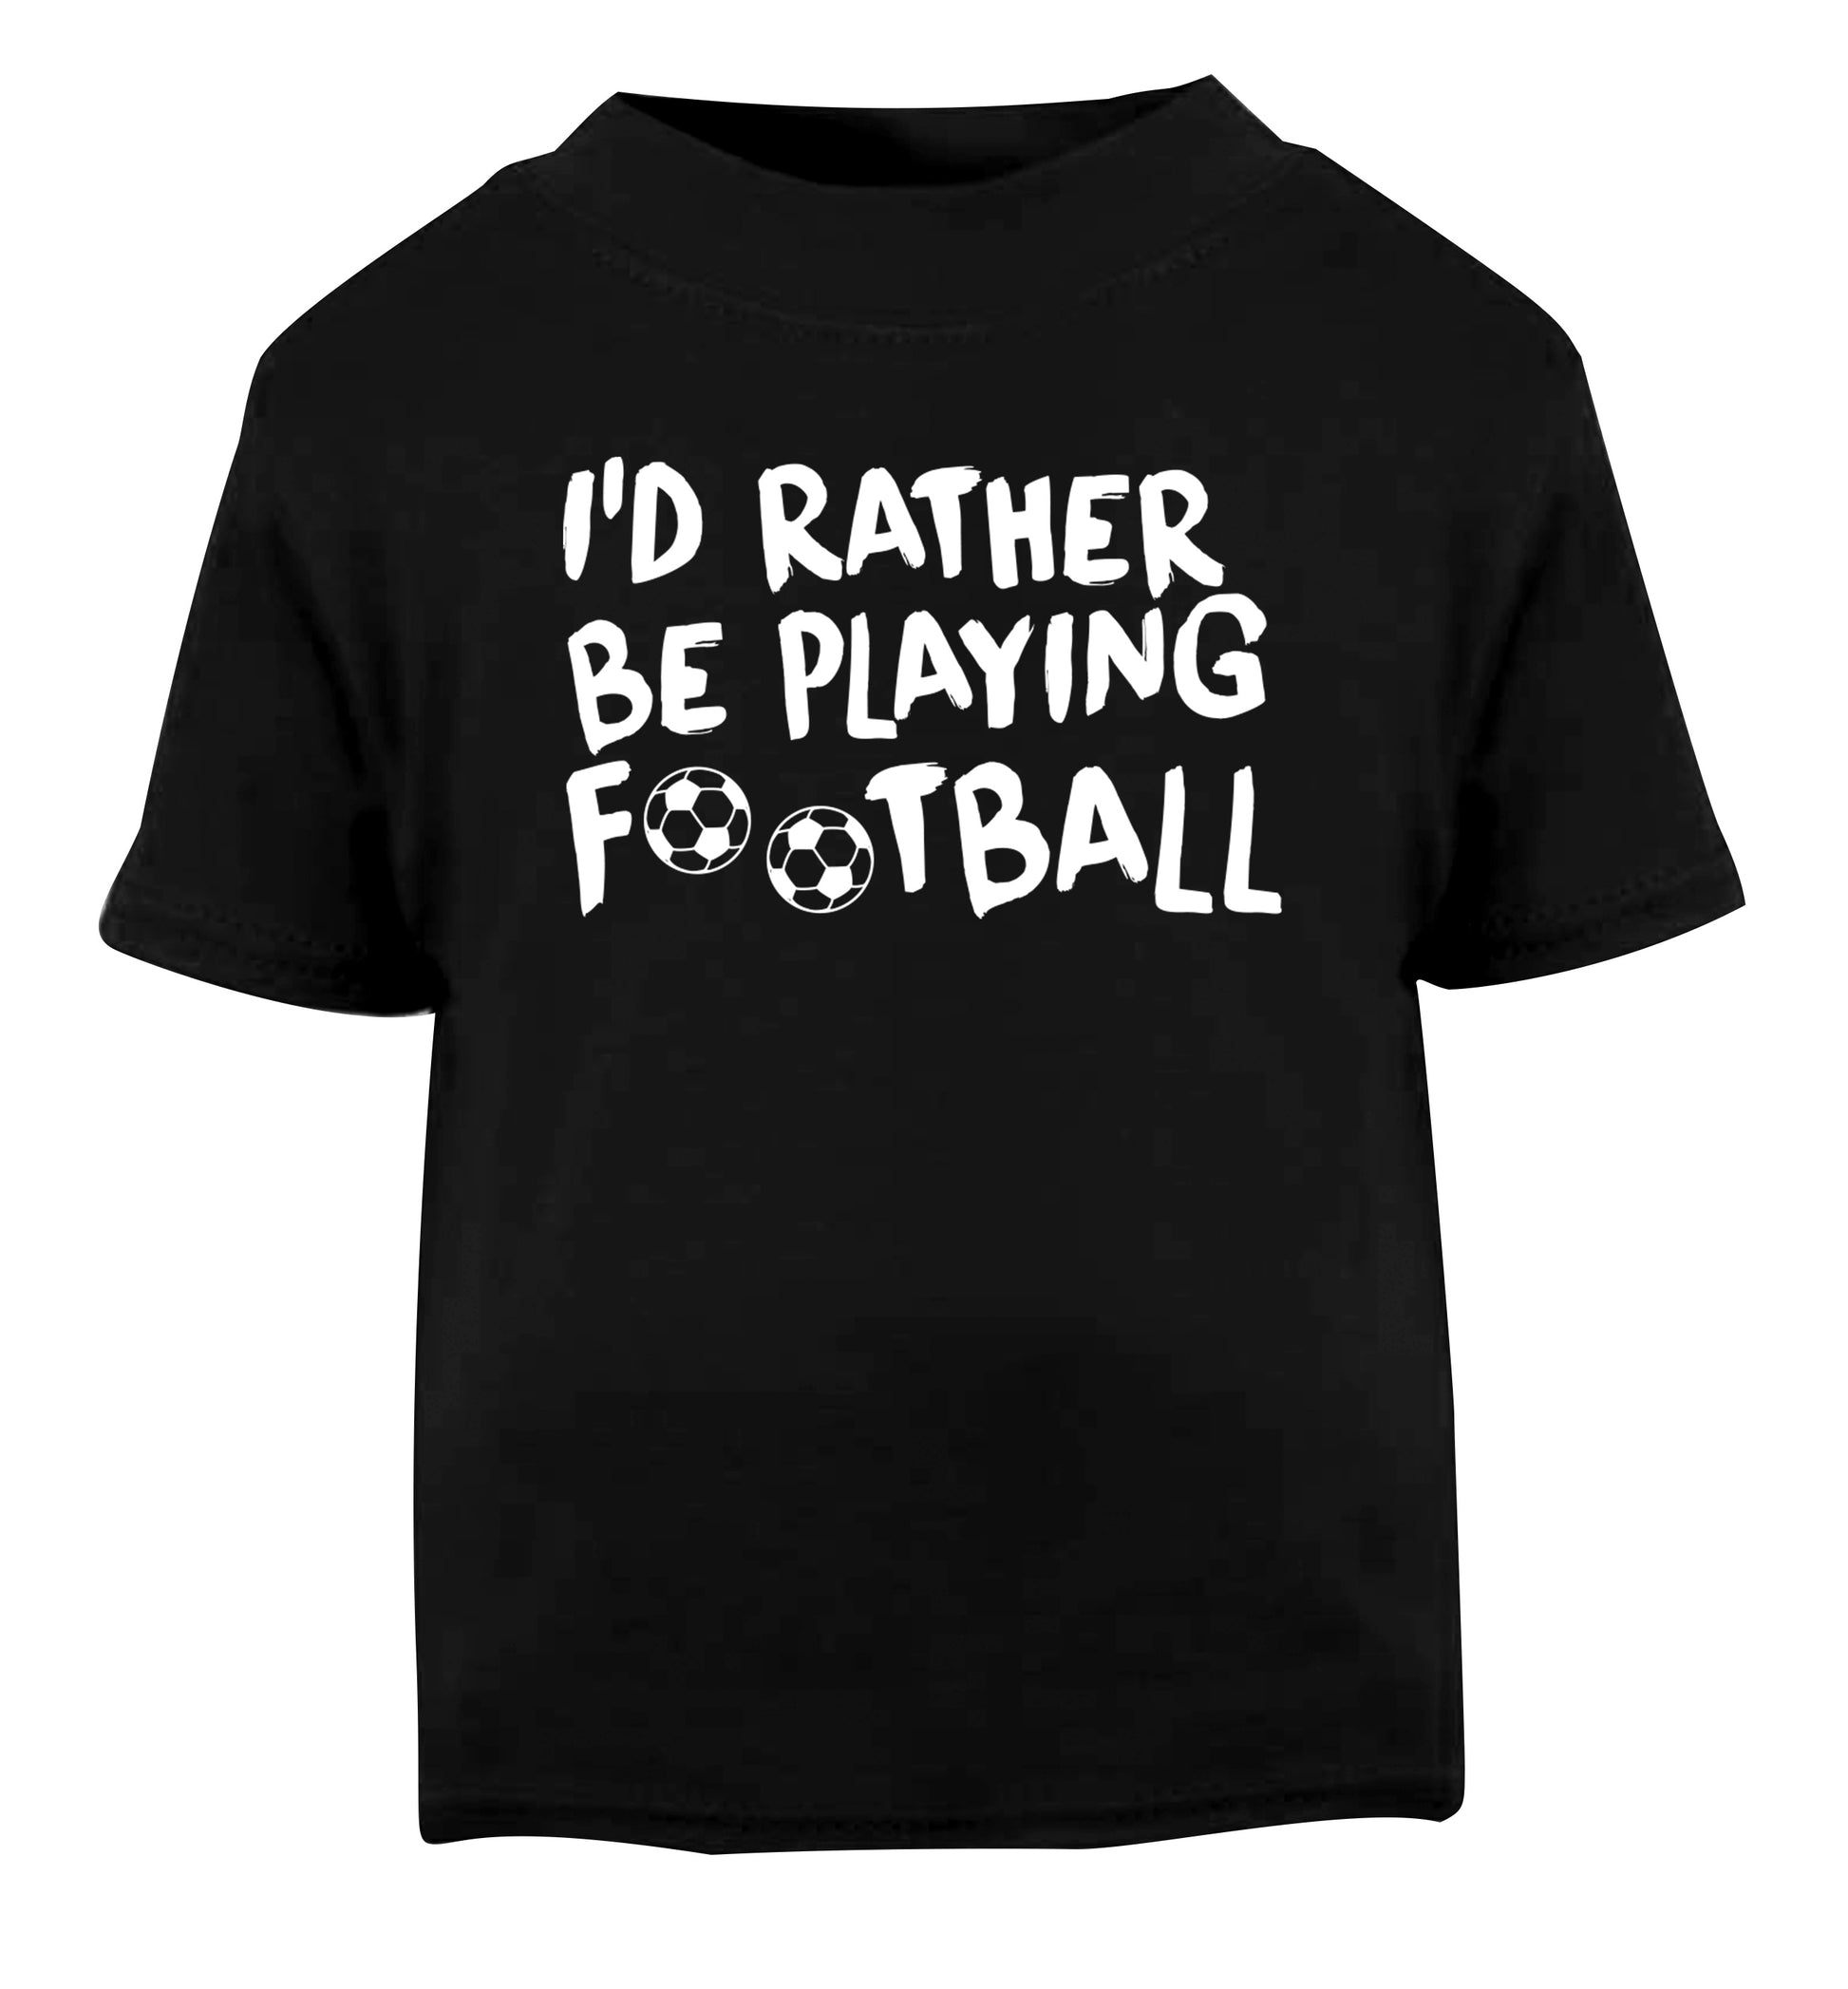 I'd rather be playing football Black Baby Toddler Tshirt 2 years